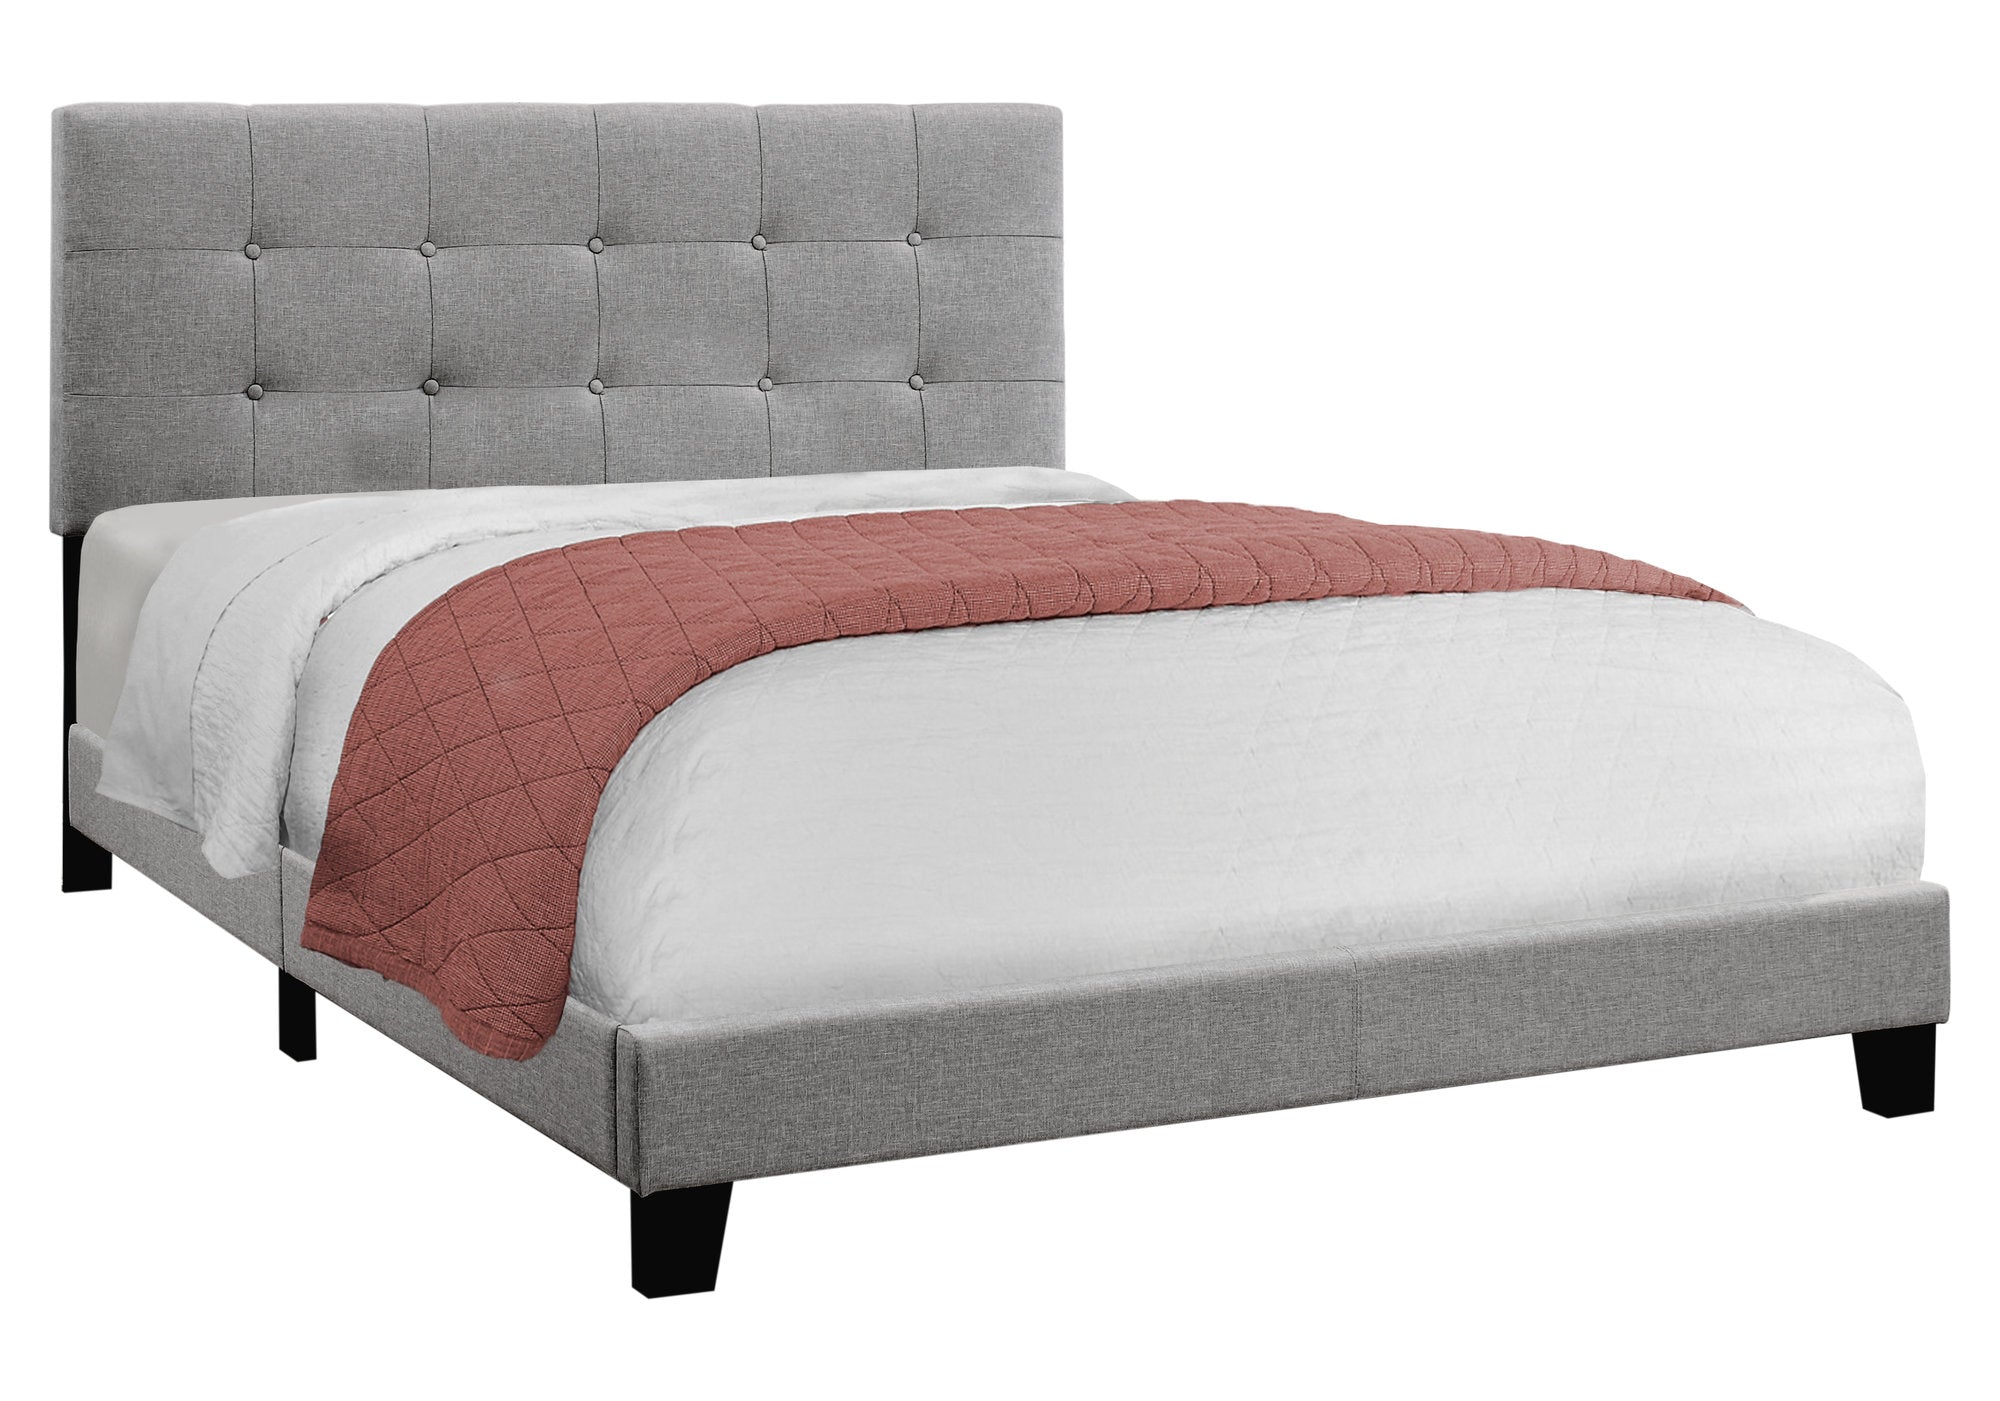 MN-935920Q    Bed, Frame, Platform, Bedroom, Queen Size, Upholstered, Linen Look Fabric, Wood Legs, Grey, Black, Contemporary, Modern